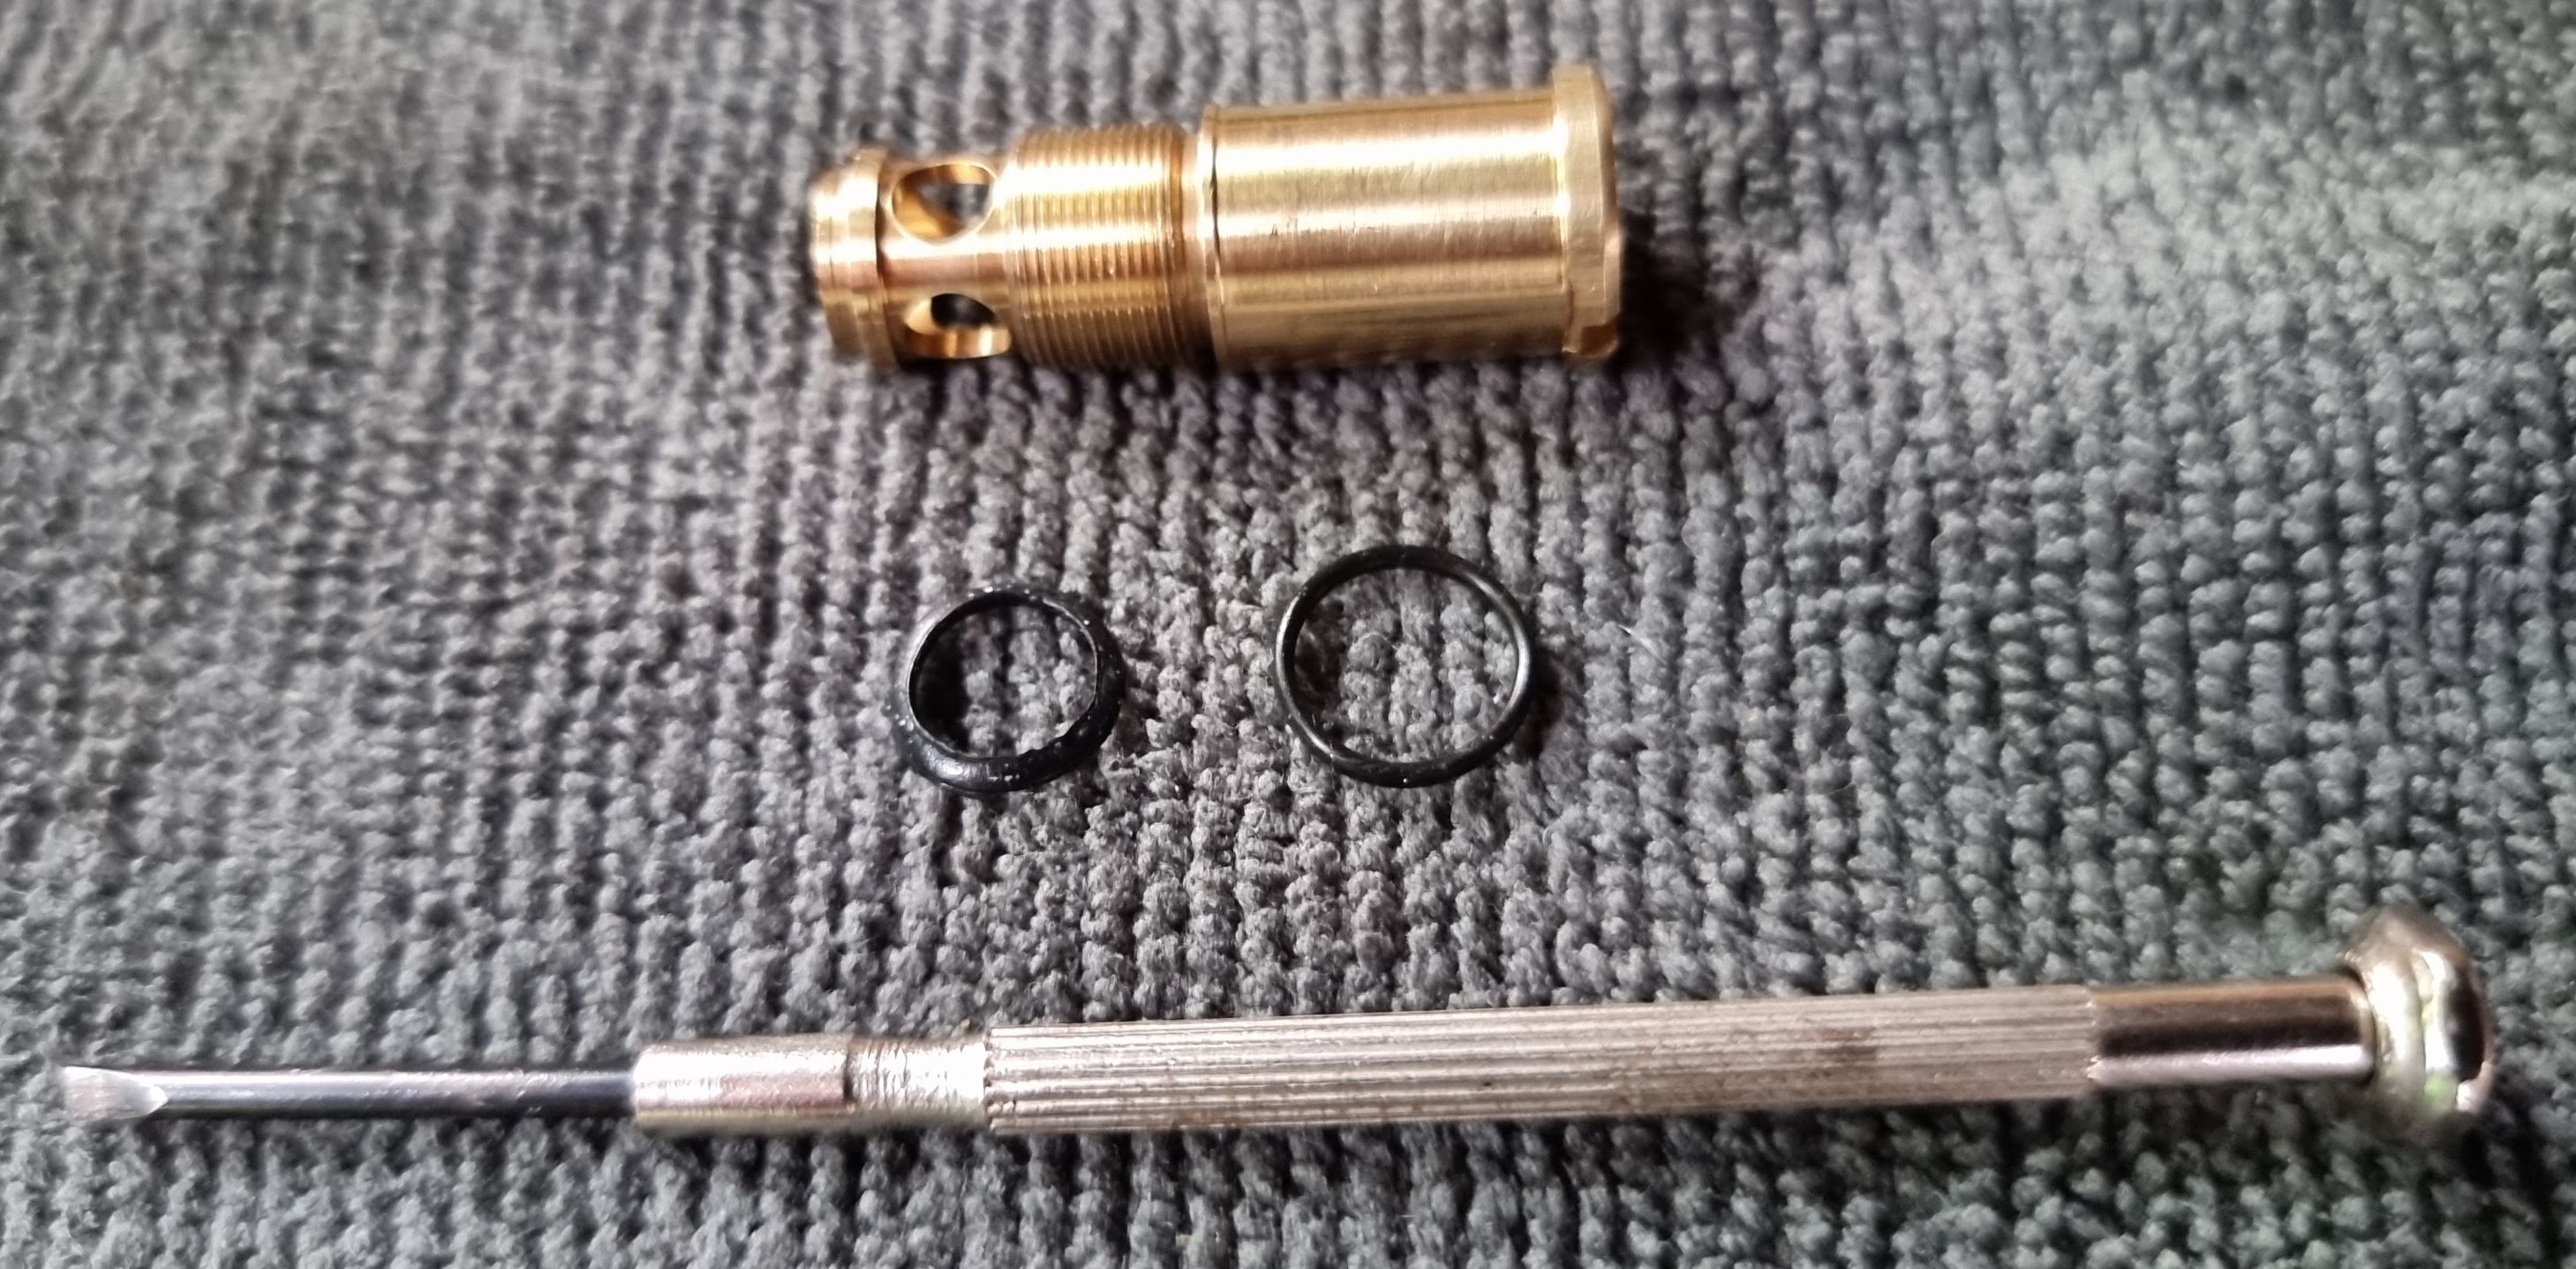 GHK Replacing The Valve Output O-Rings Guide: Remove the O-Rings from the brass shell of the gas output valve